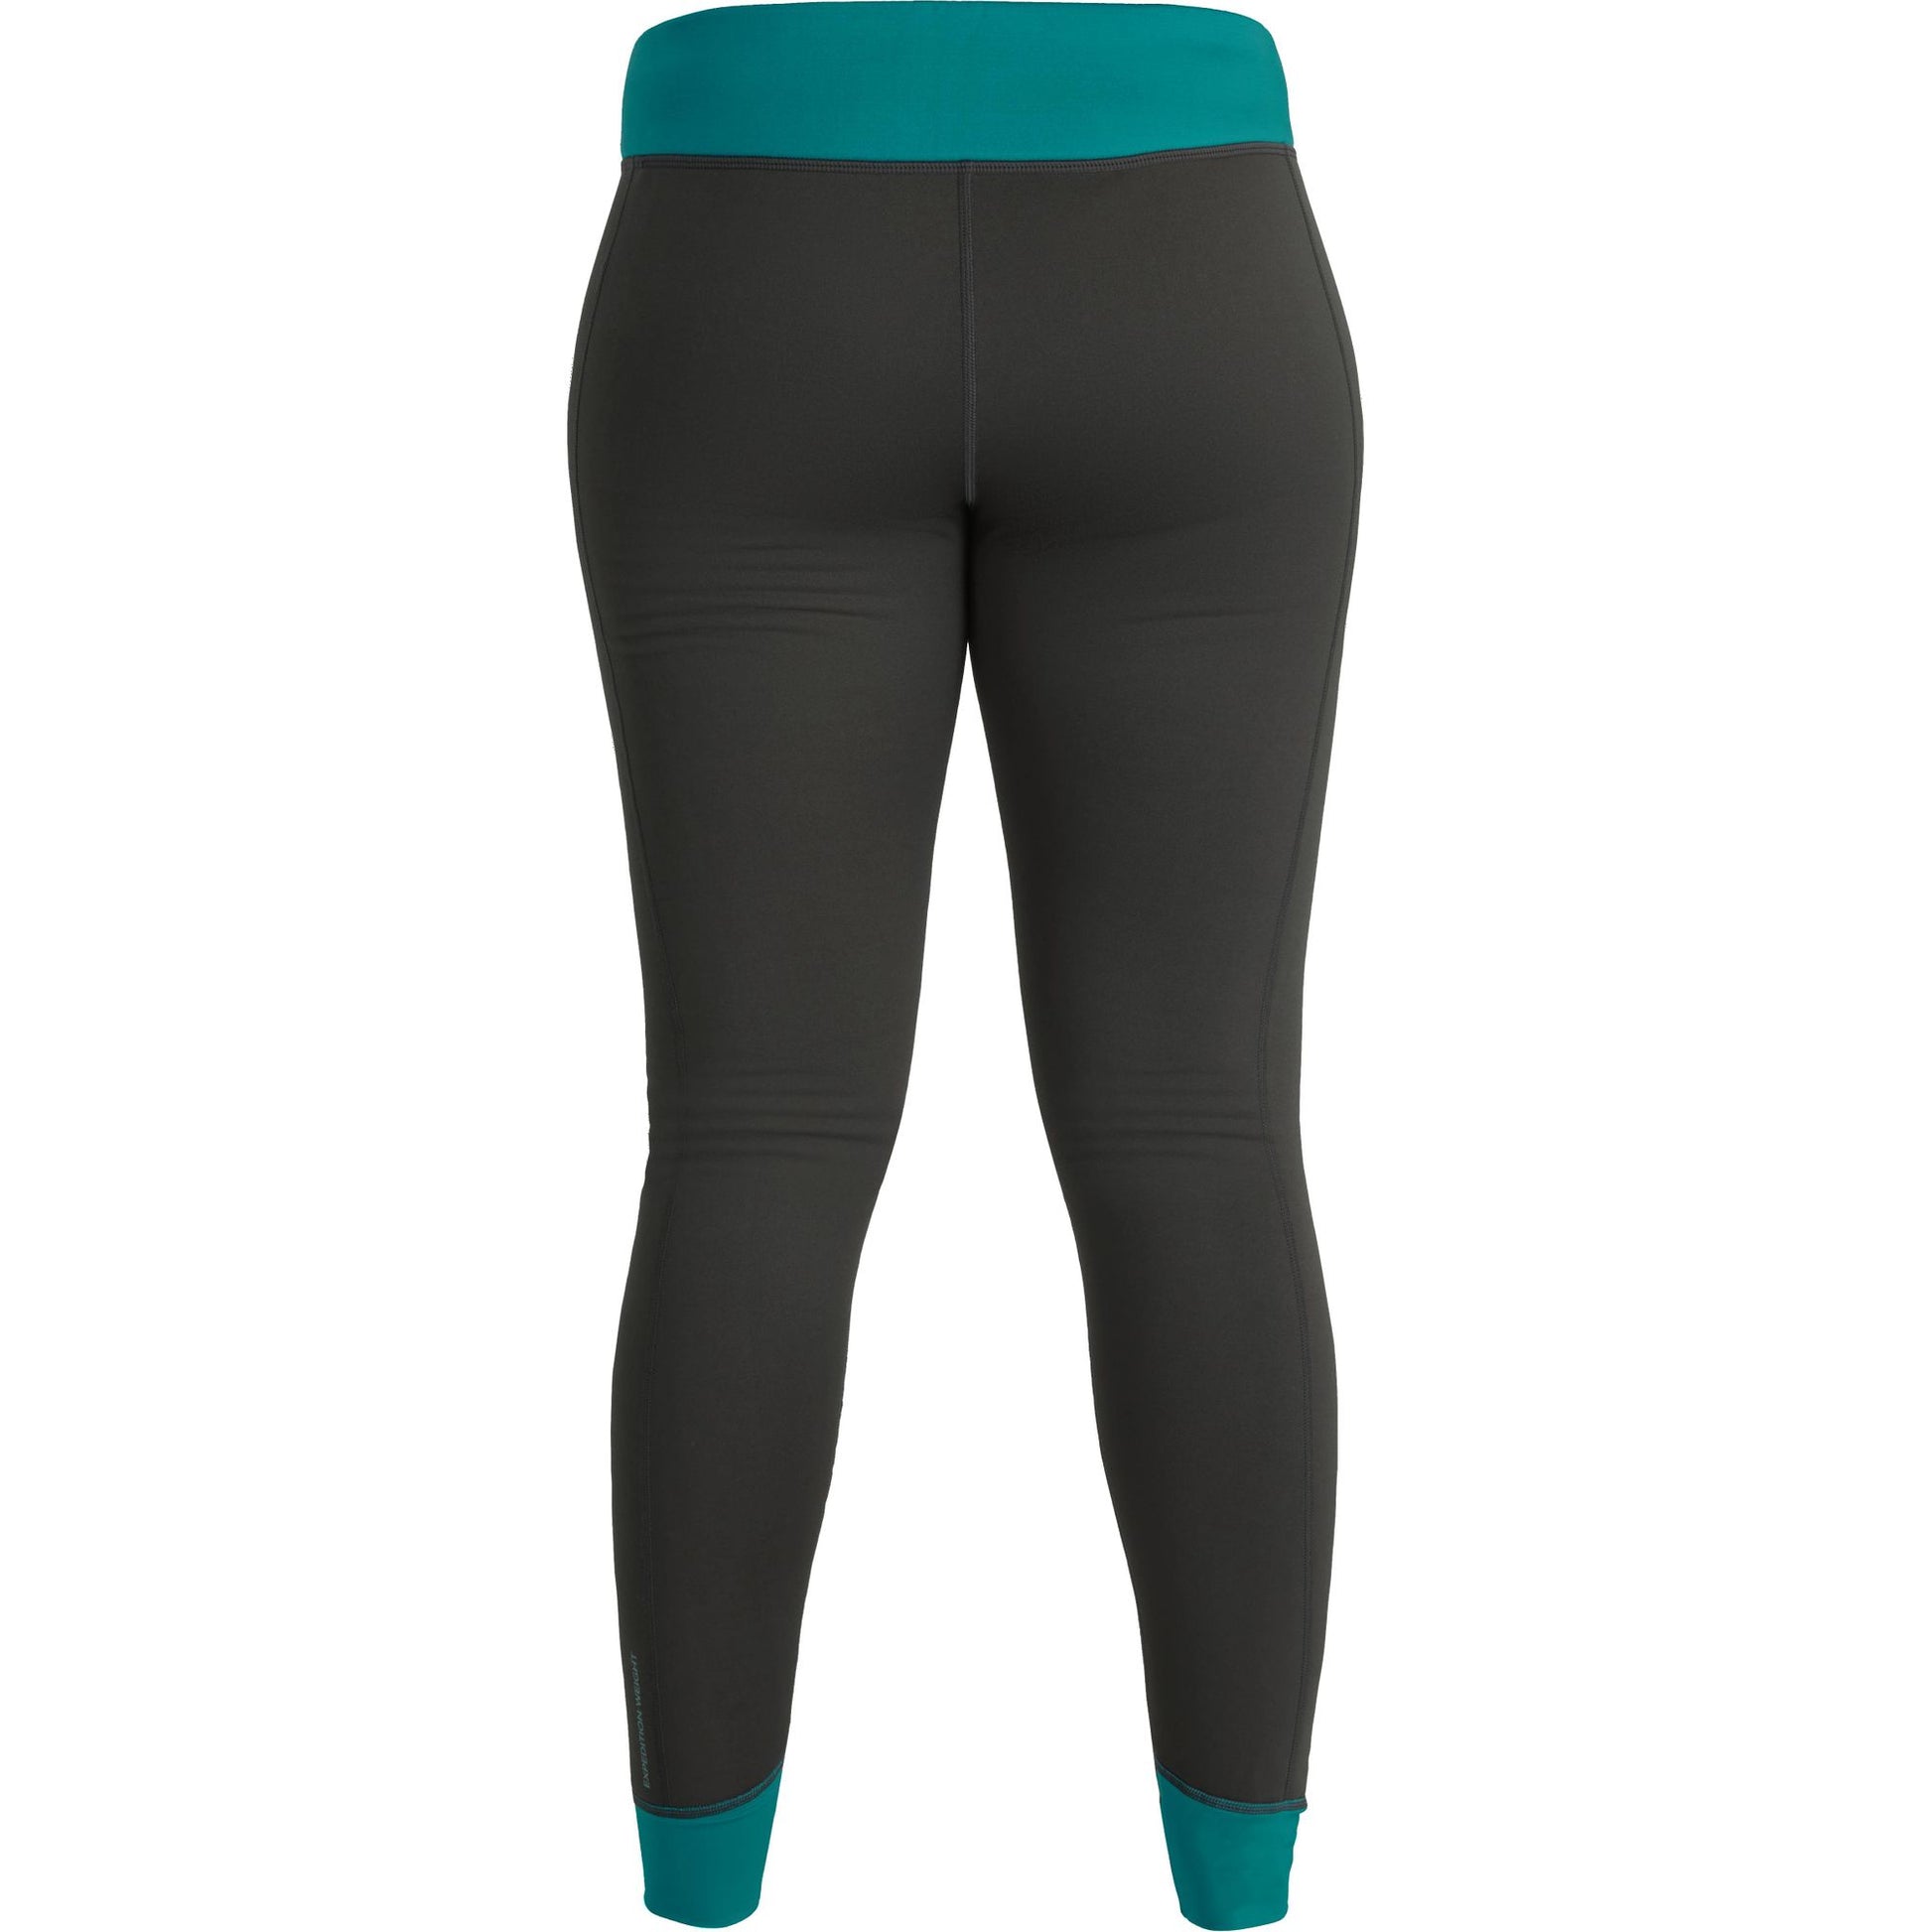 A person's legs in NRS Expedition Weight Pants - Women's.